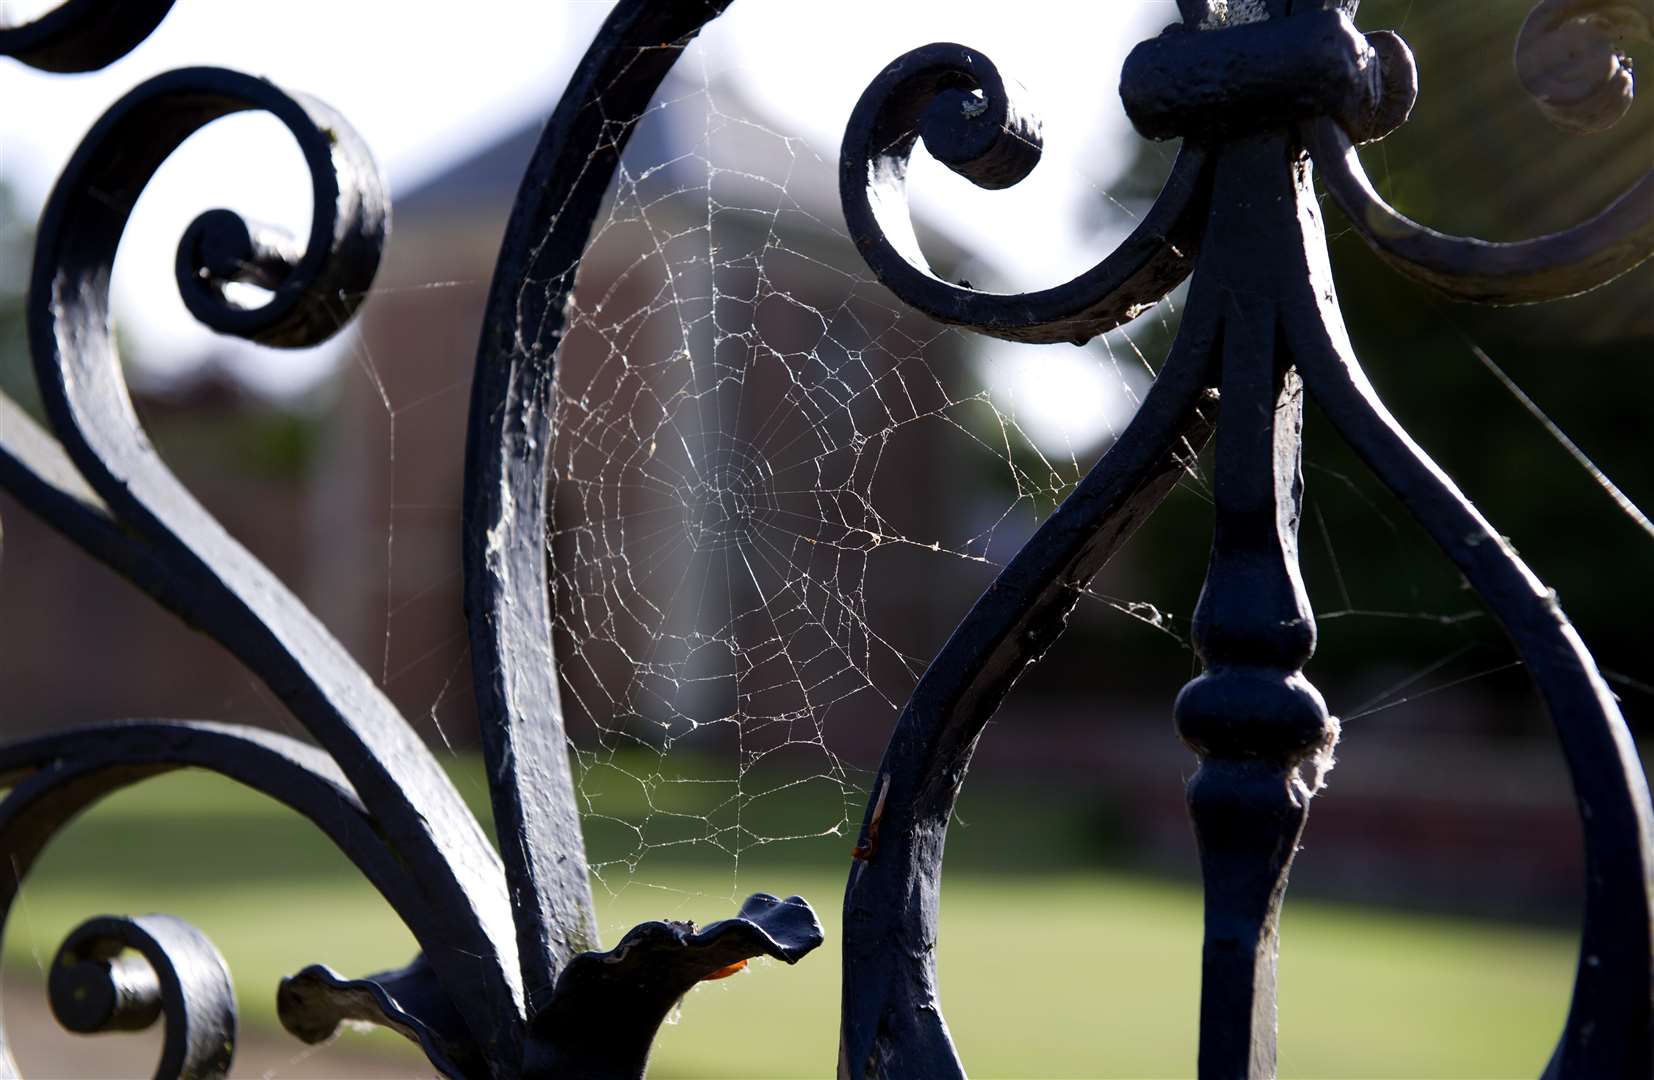 Halloween is being celebrated at Kent's National Trust properties